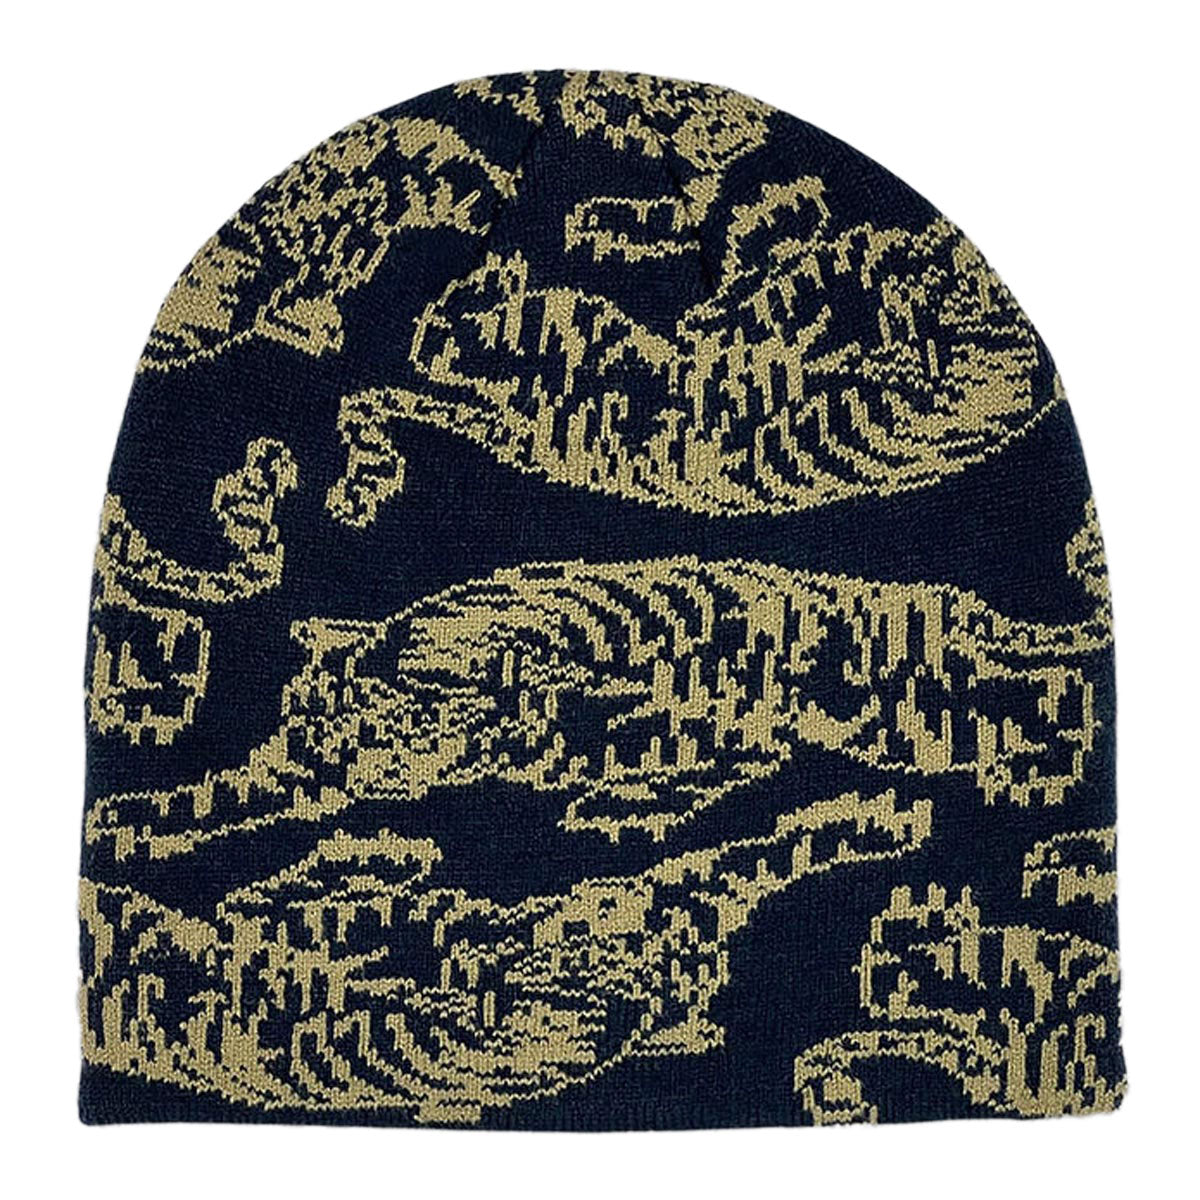 LO-RES Leisure Beanie - Navy image 1